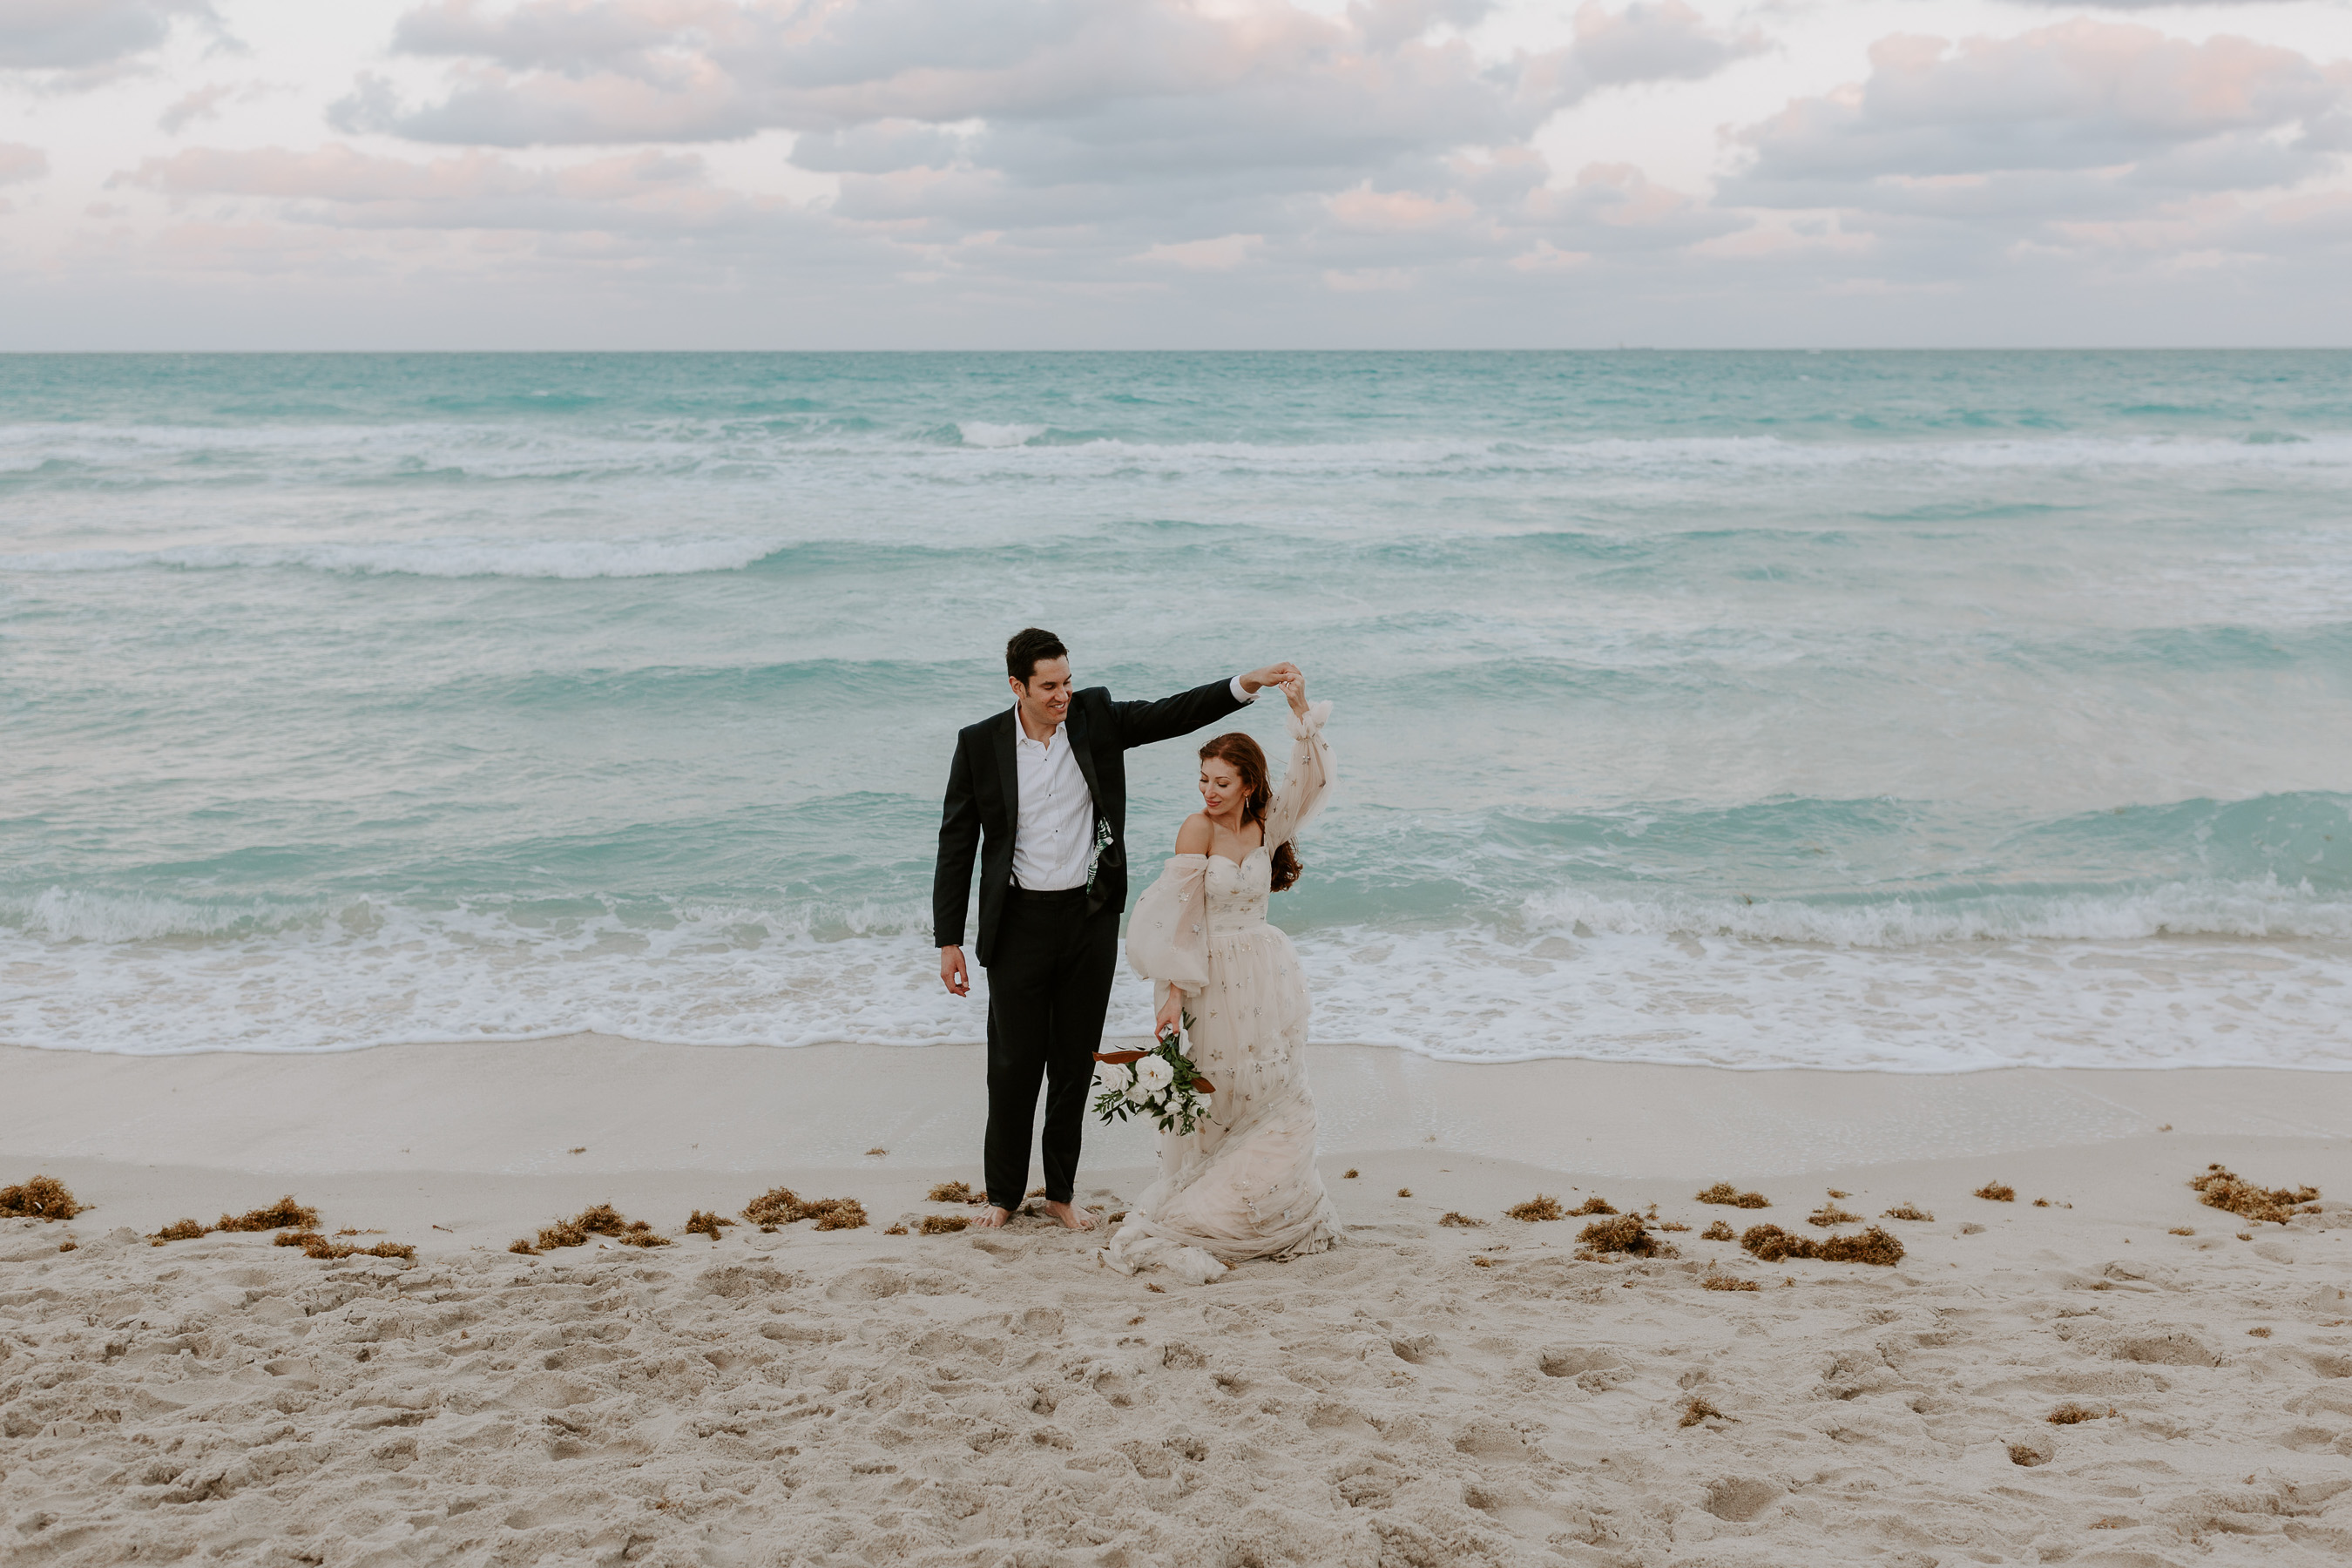 Miami Beach Elopement ideas and inspiration